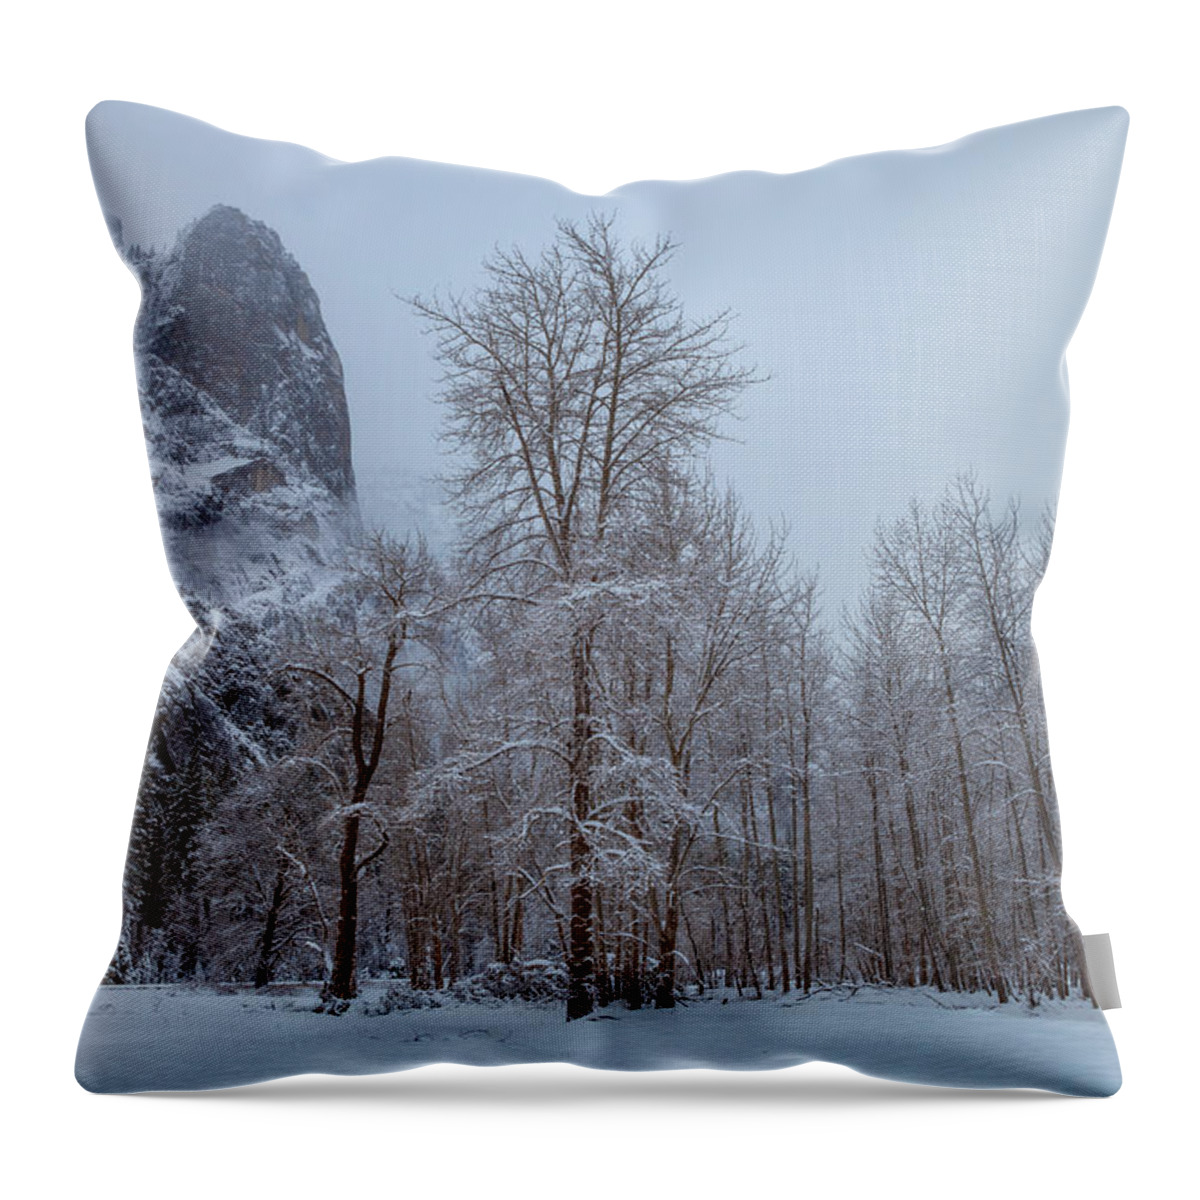 Landscape Throw Pillow featuring the photograph Solitary by Jonathan Nguyen